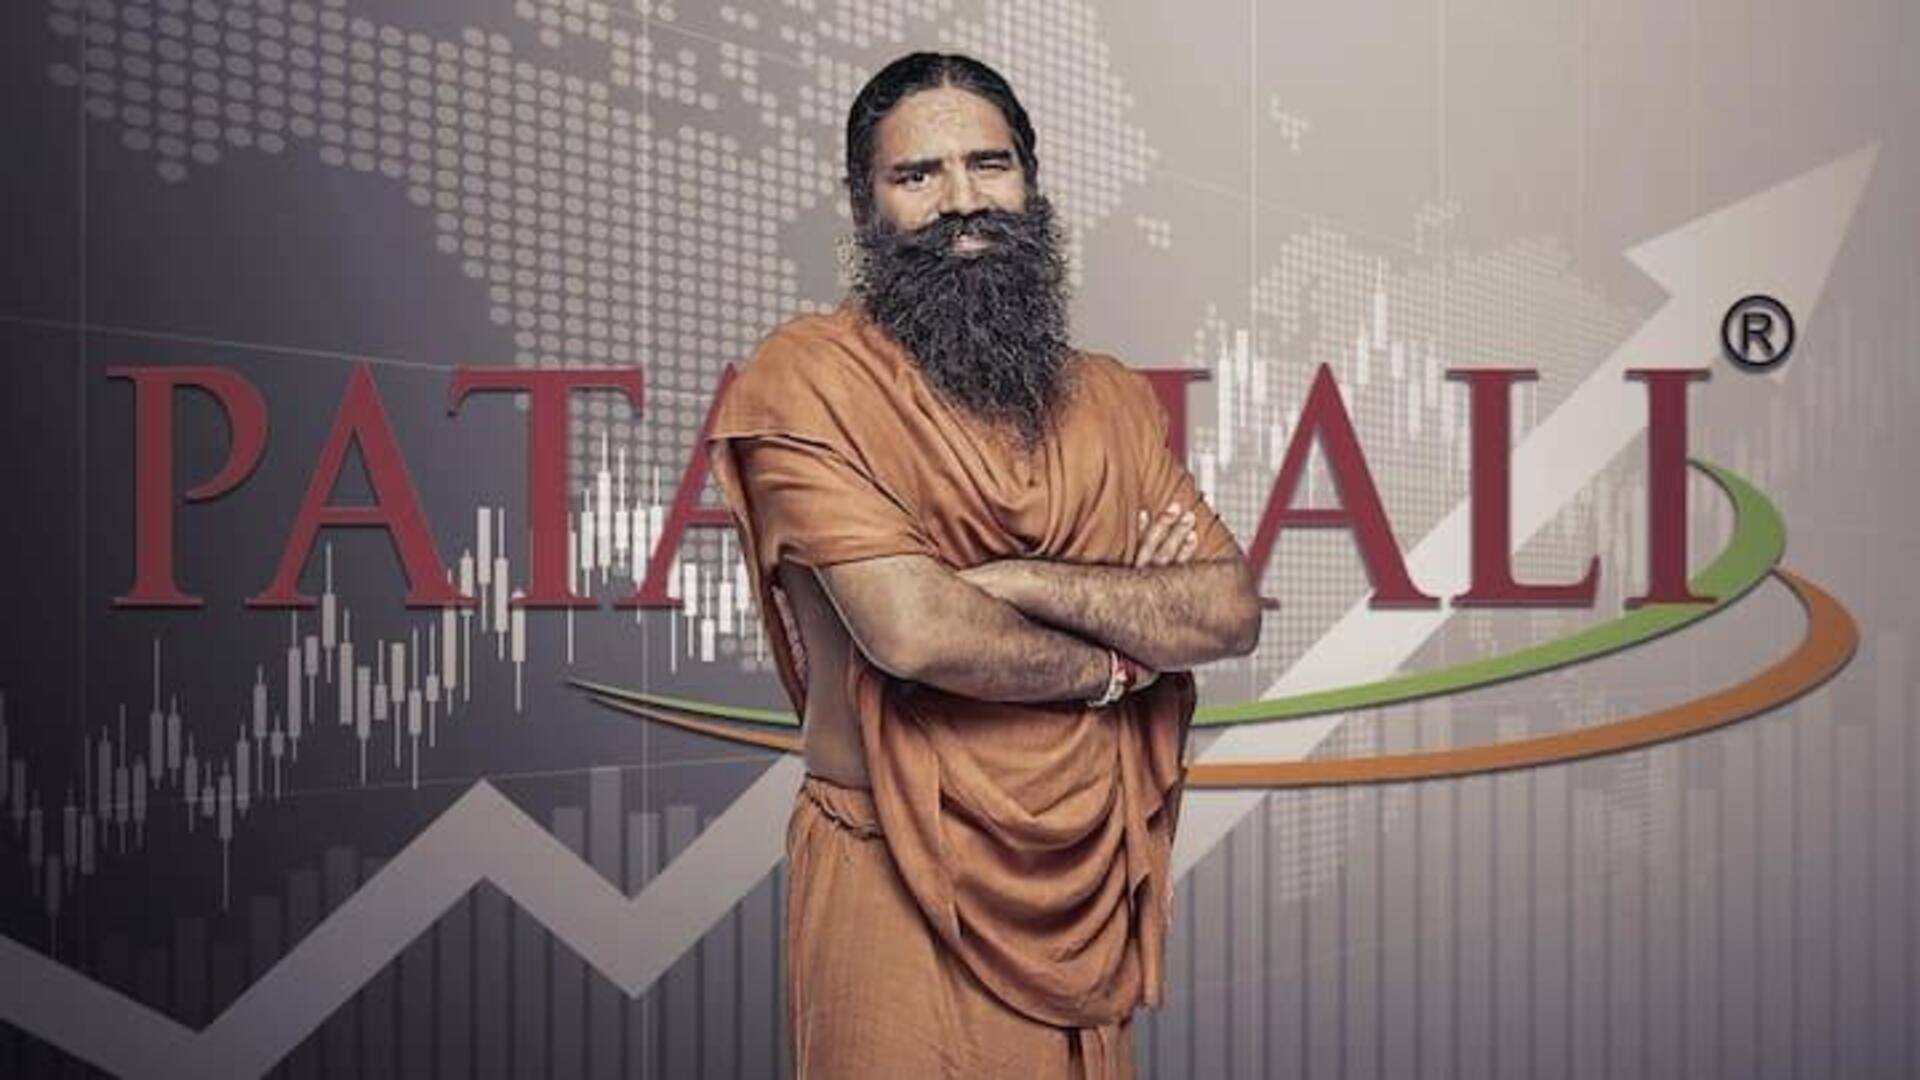 Patanjali official, 2 others jailed over failed food quality test